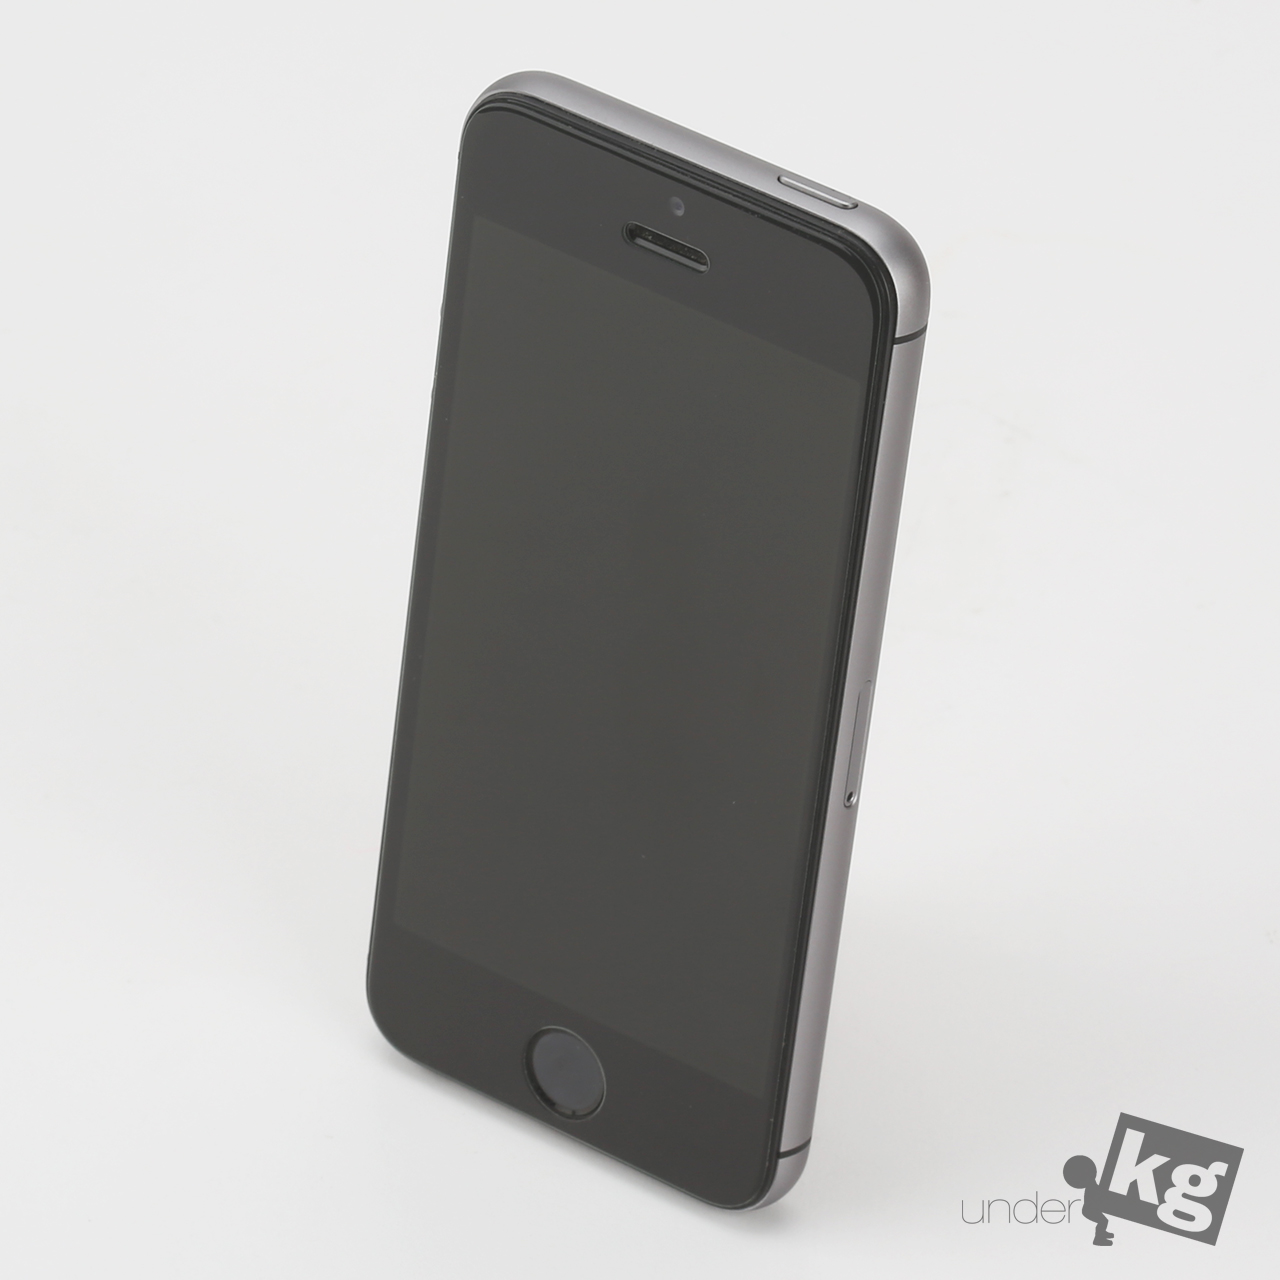 iphone5s-to-iphone6-housing-change-pic1.jpg